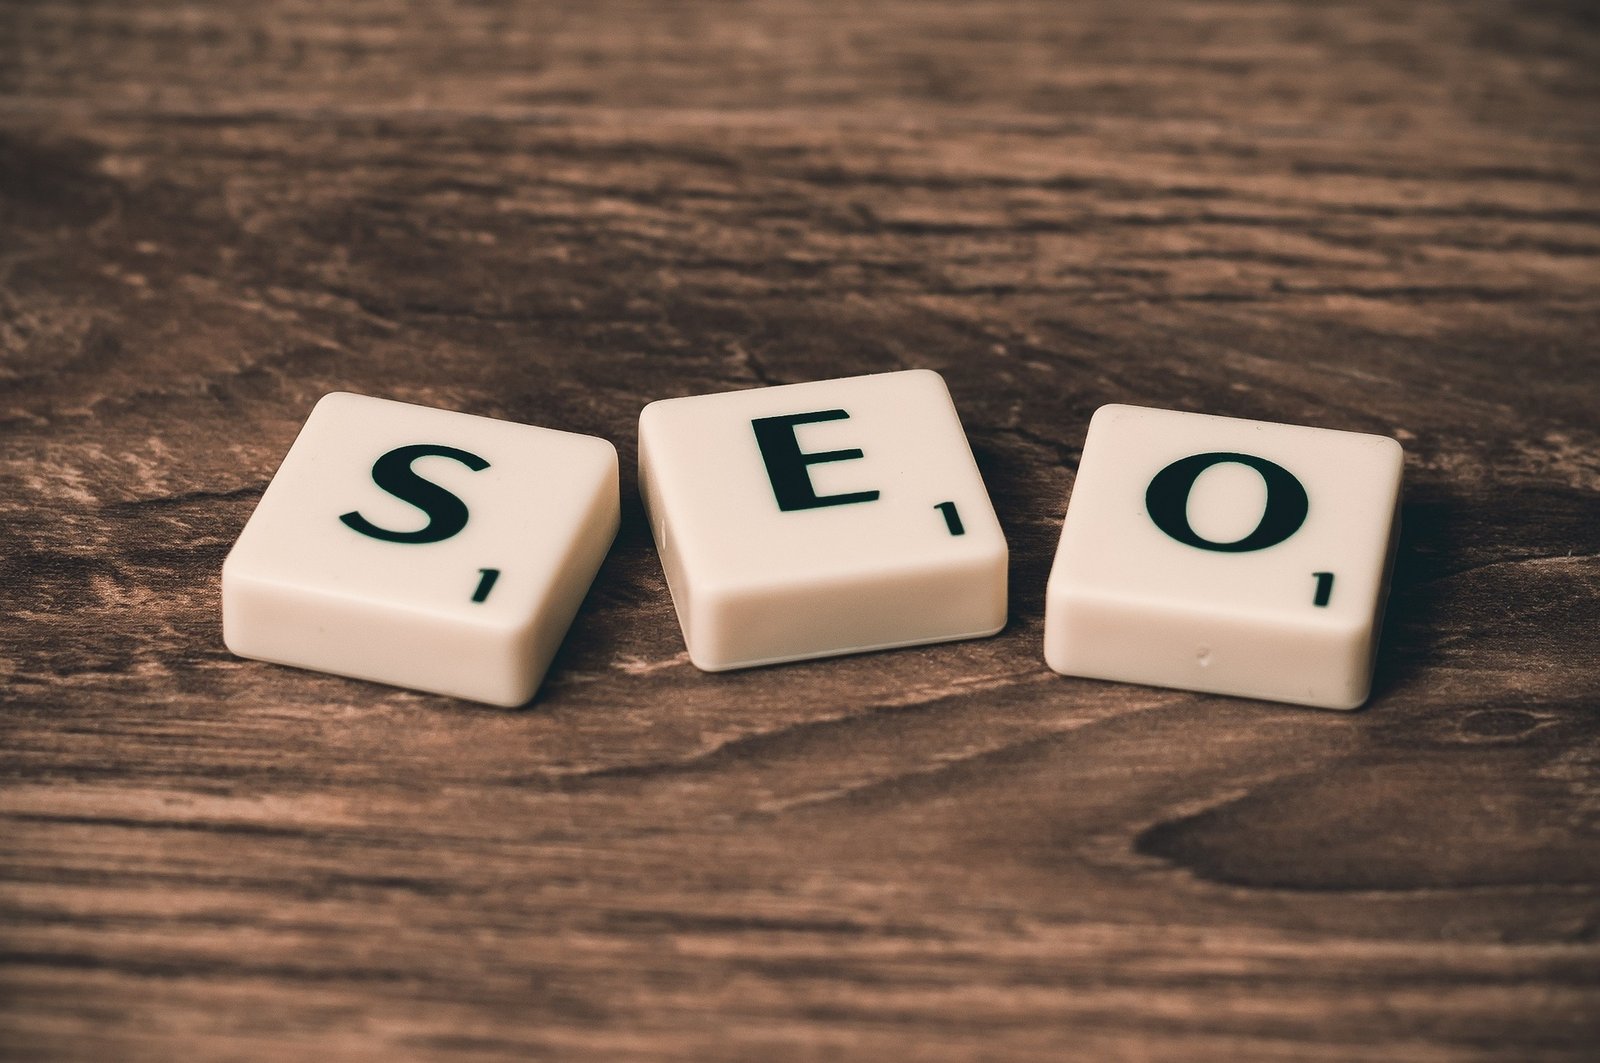 Why SEO is important?